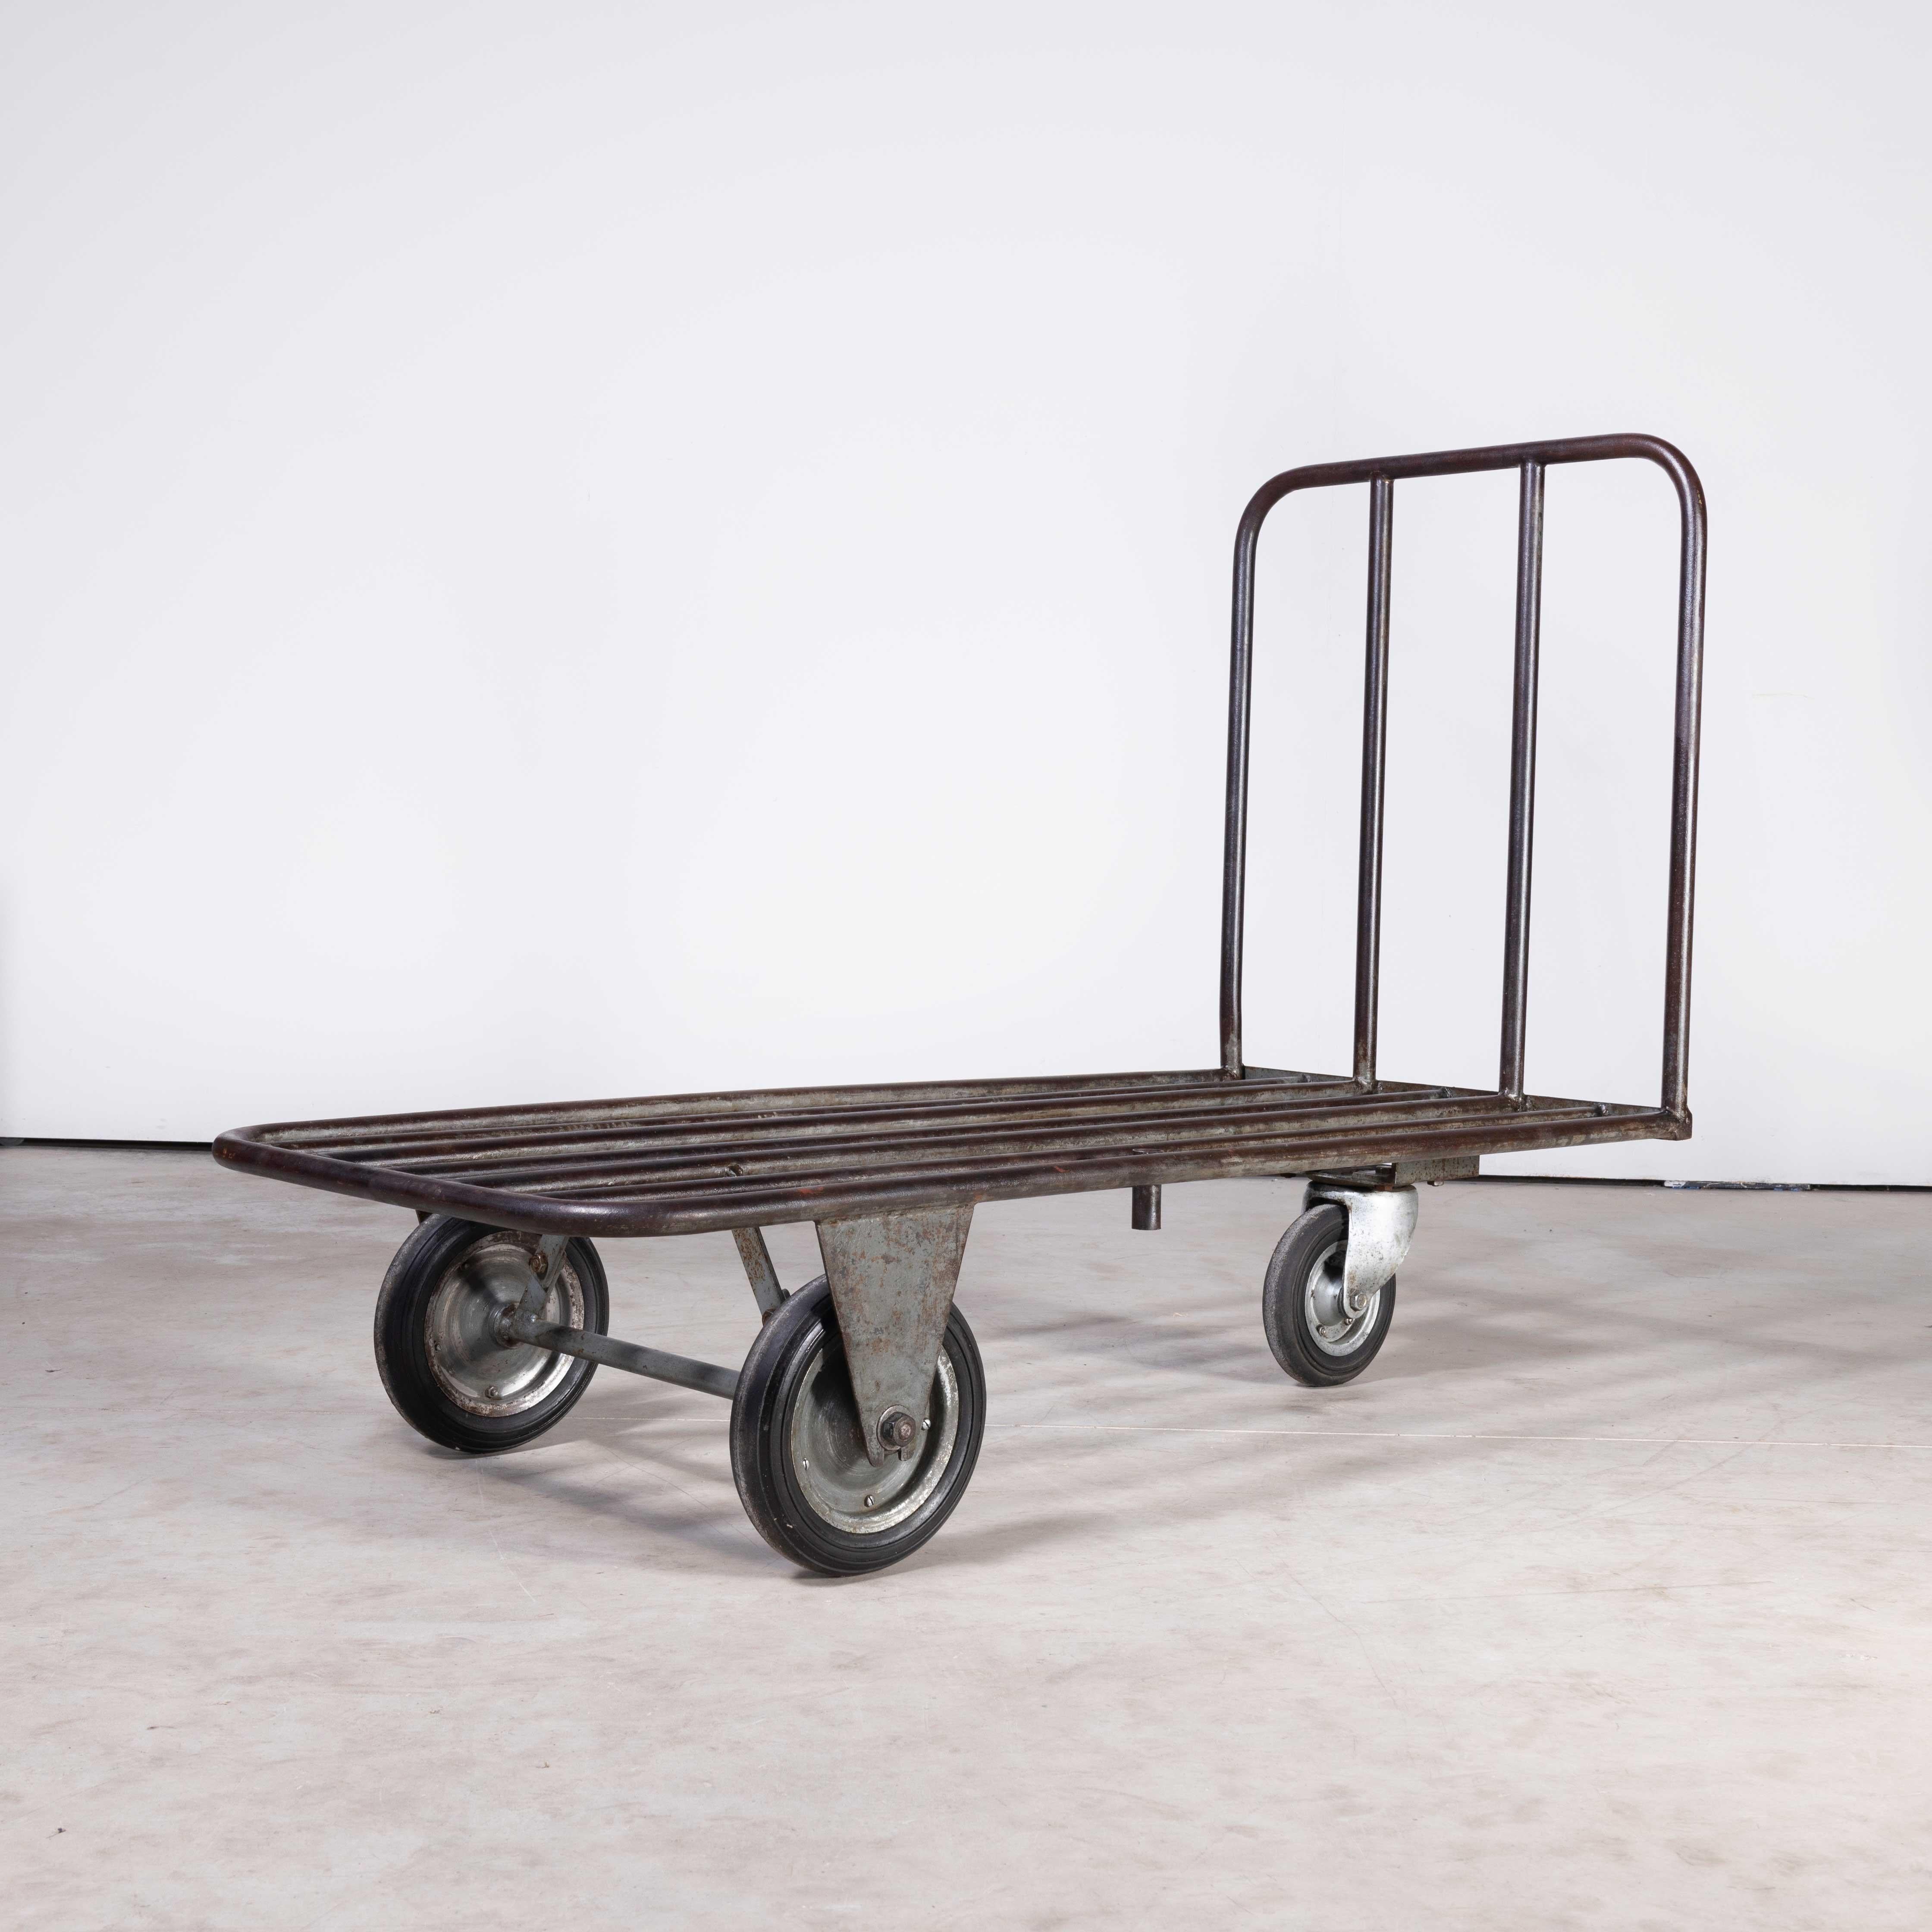 1940’s French industrial metal trolley – occasional table
1940’s French industrial metal trolley – occasional table. Heavy weight industrial trolley that has been carefully cleaned and restored in our workshop. Perefct as a low table or general